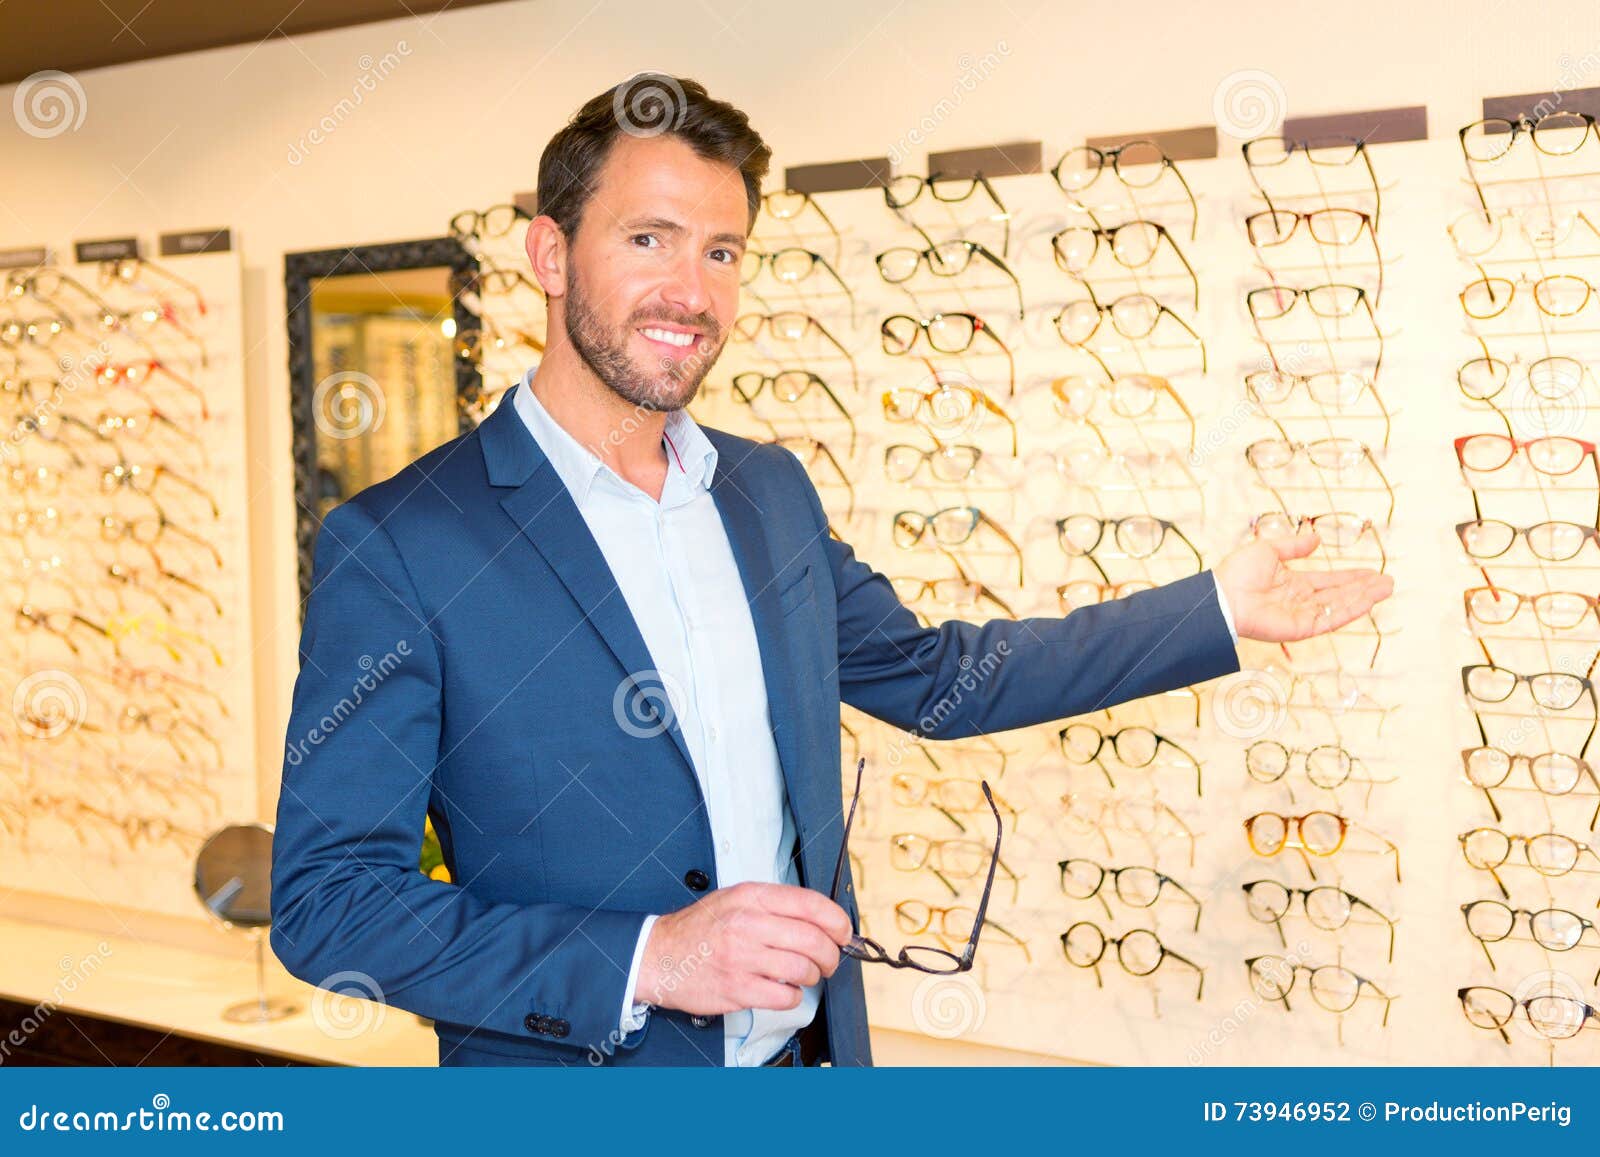 Attractive Optician Working in His Glasses Shop Stock Photo - Image of ...